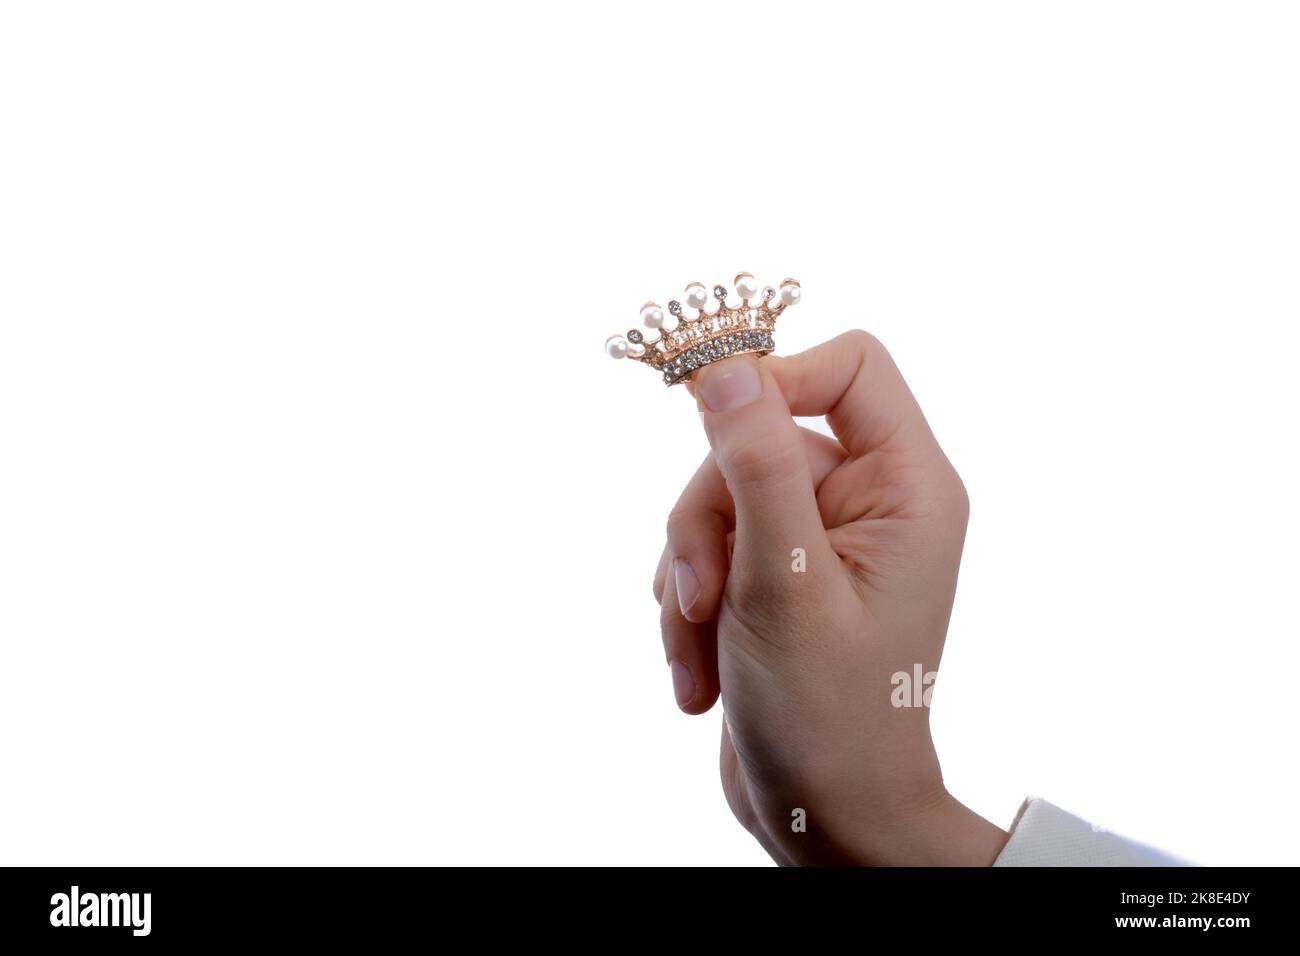 Golden color crown with pearls in hand on a white backgound Stock Photo